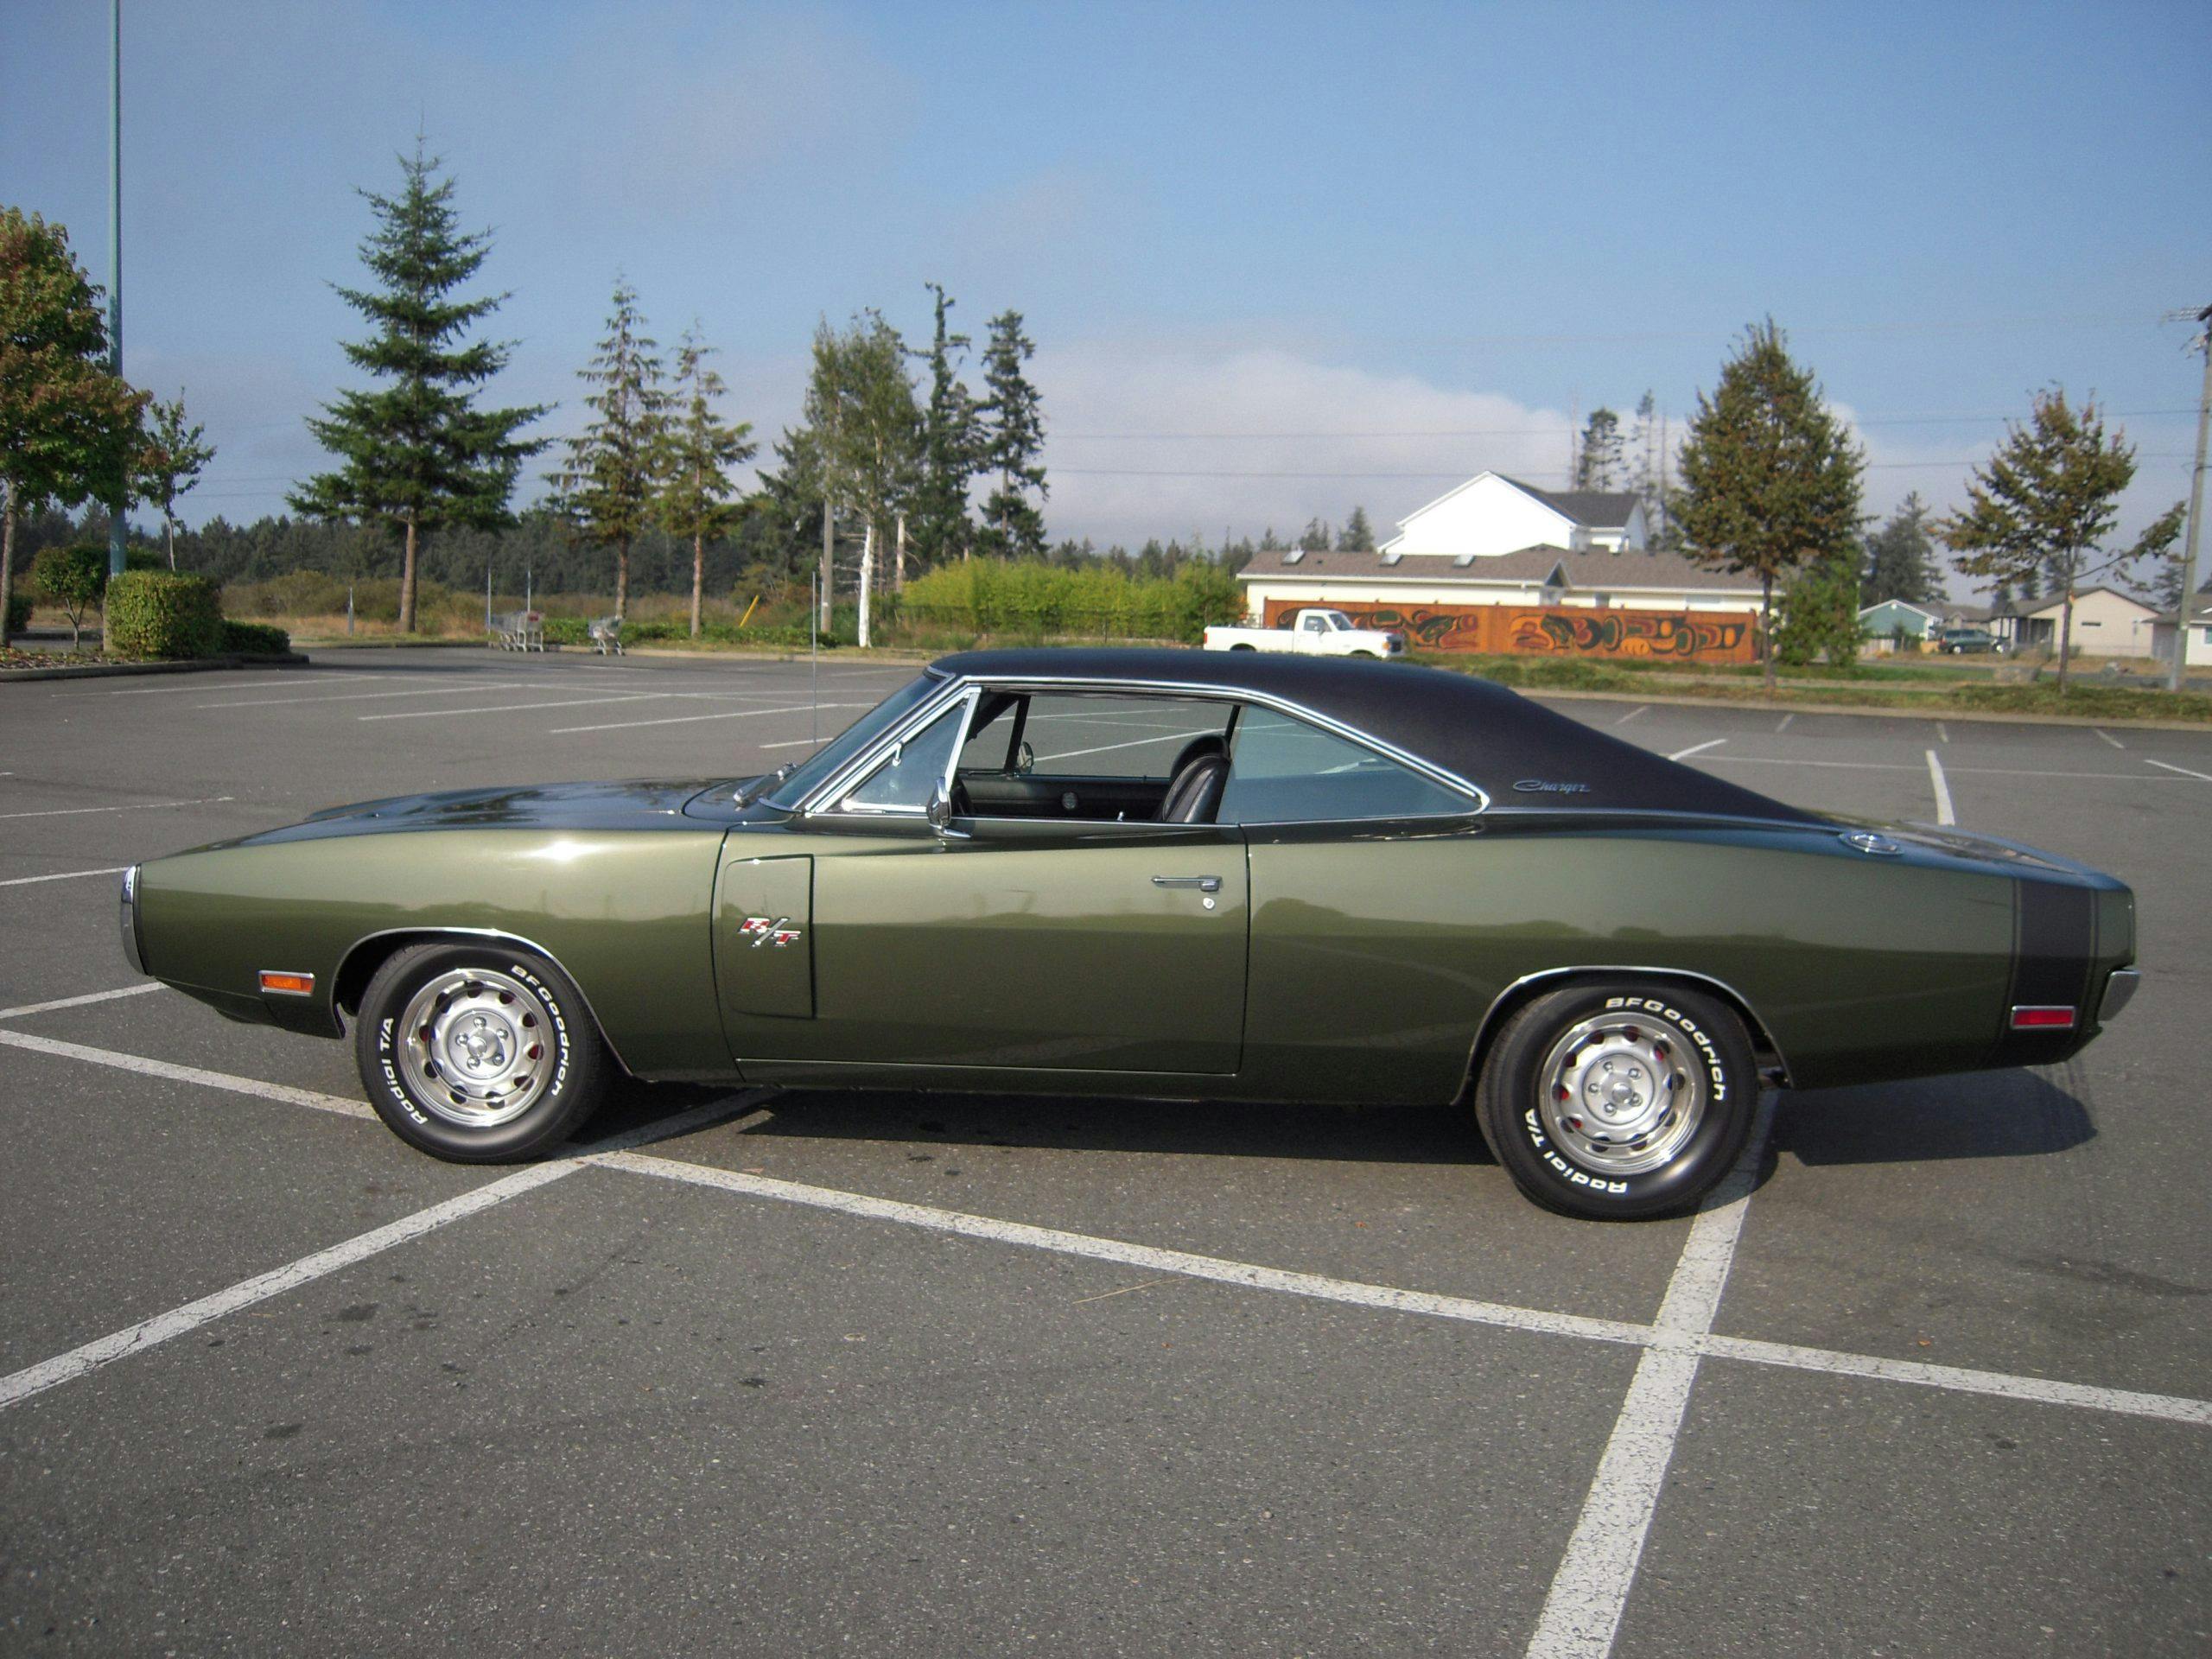 1970 Dodge Charger RT side